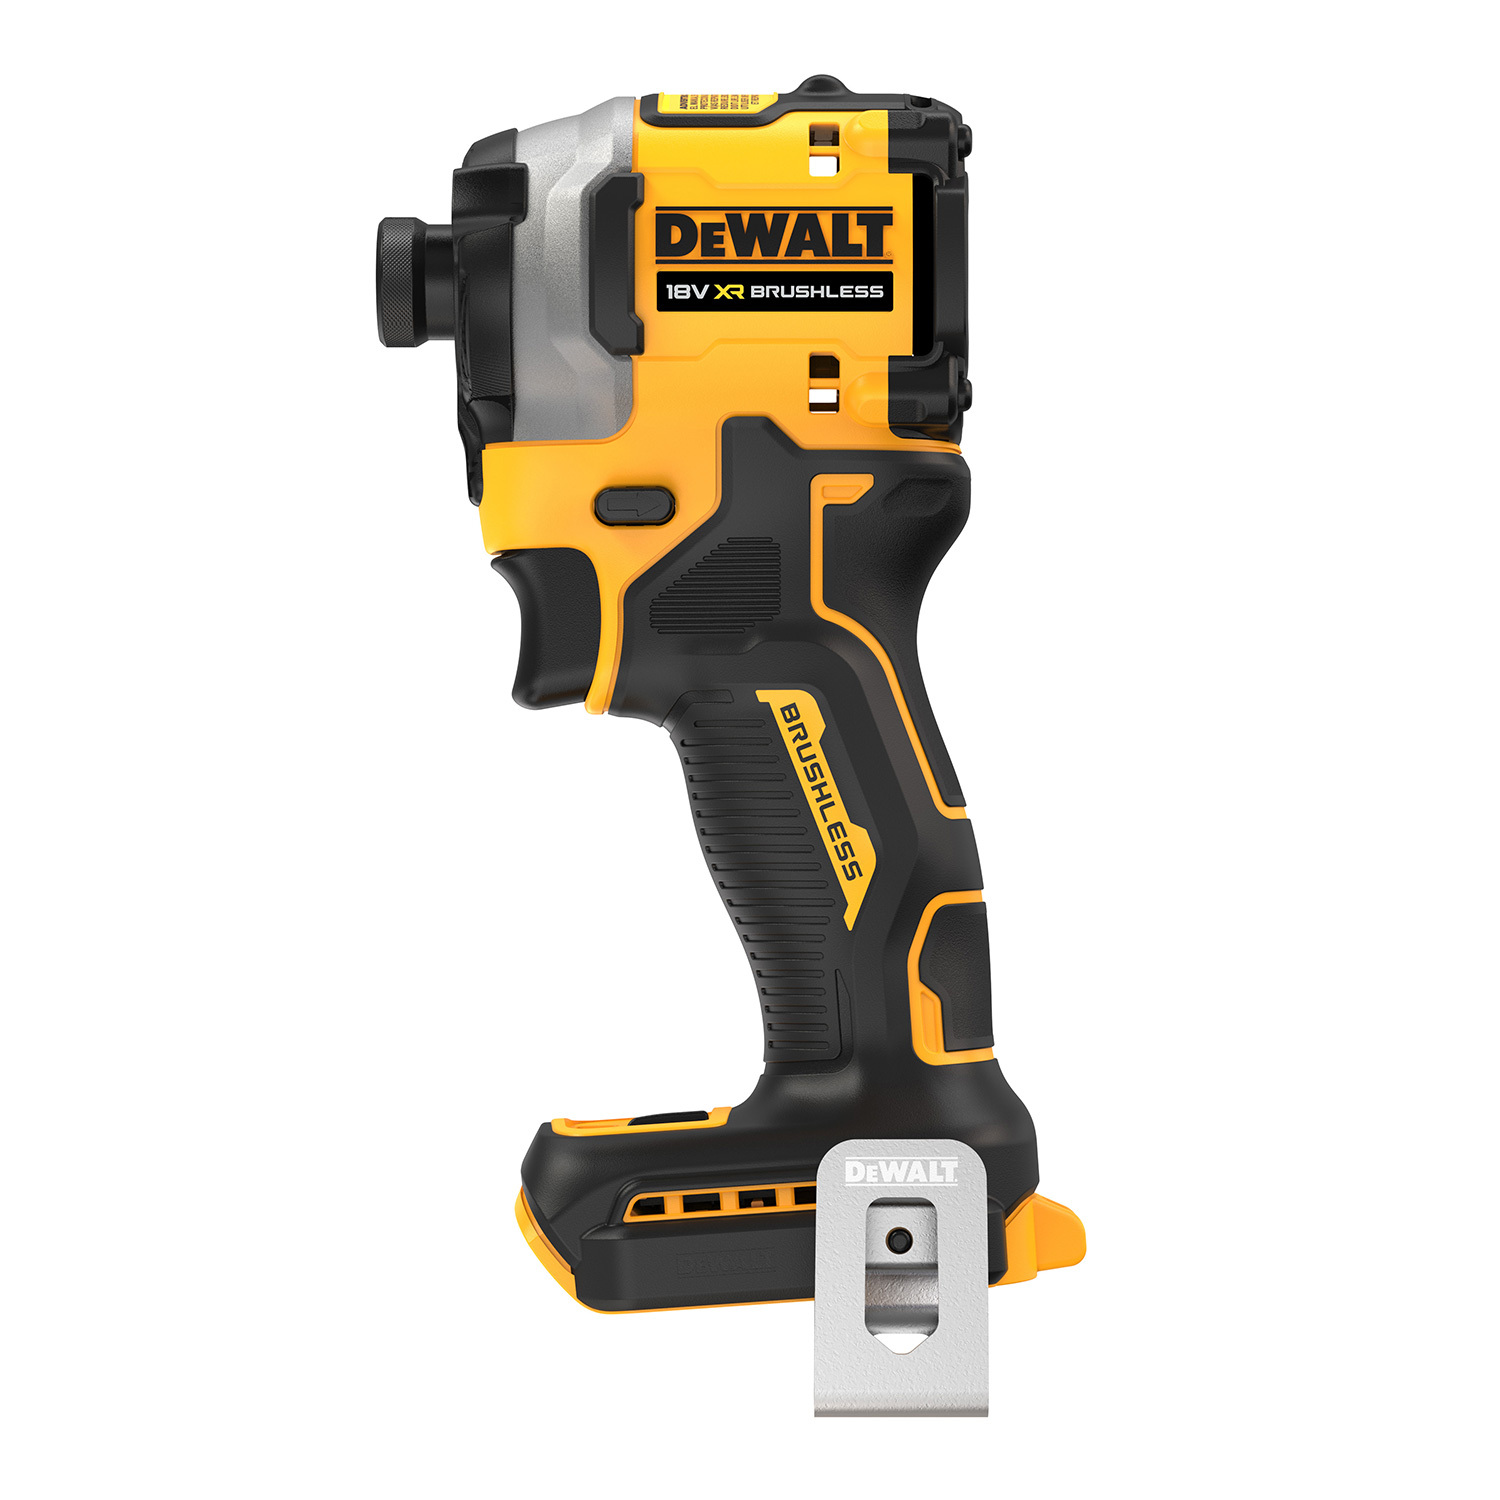 DeWalt 18V Compact 3 Speed Impact Driver (tool only) DCF850N-XJ